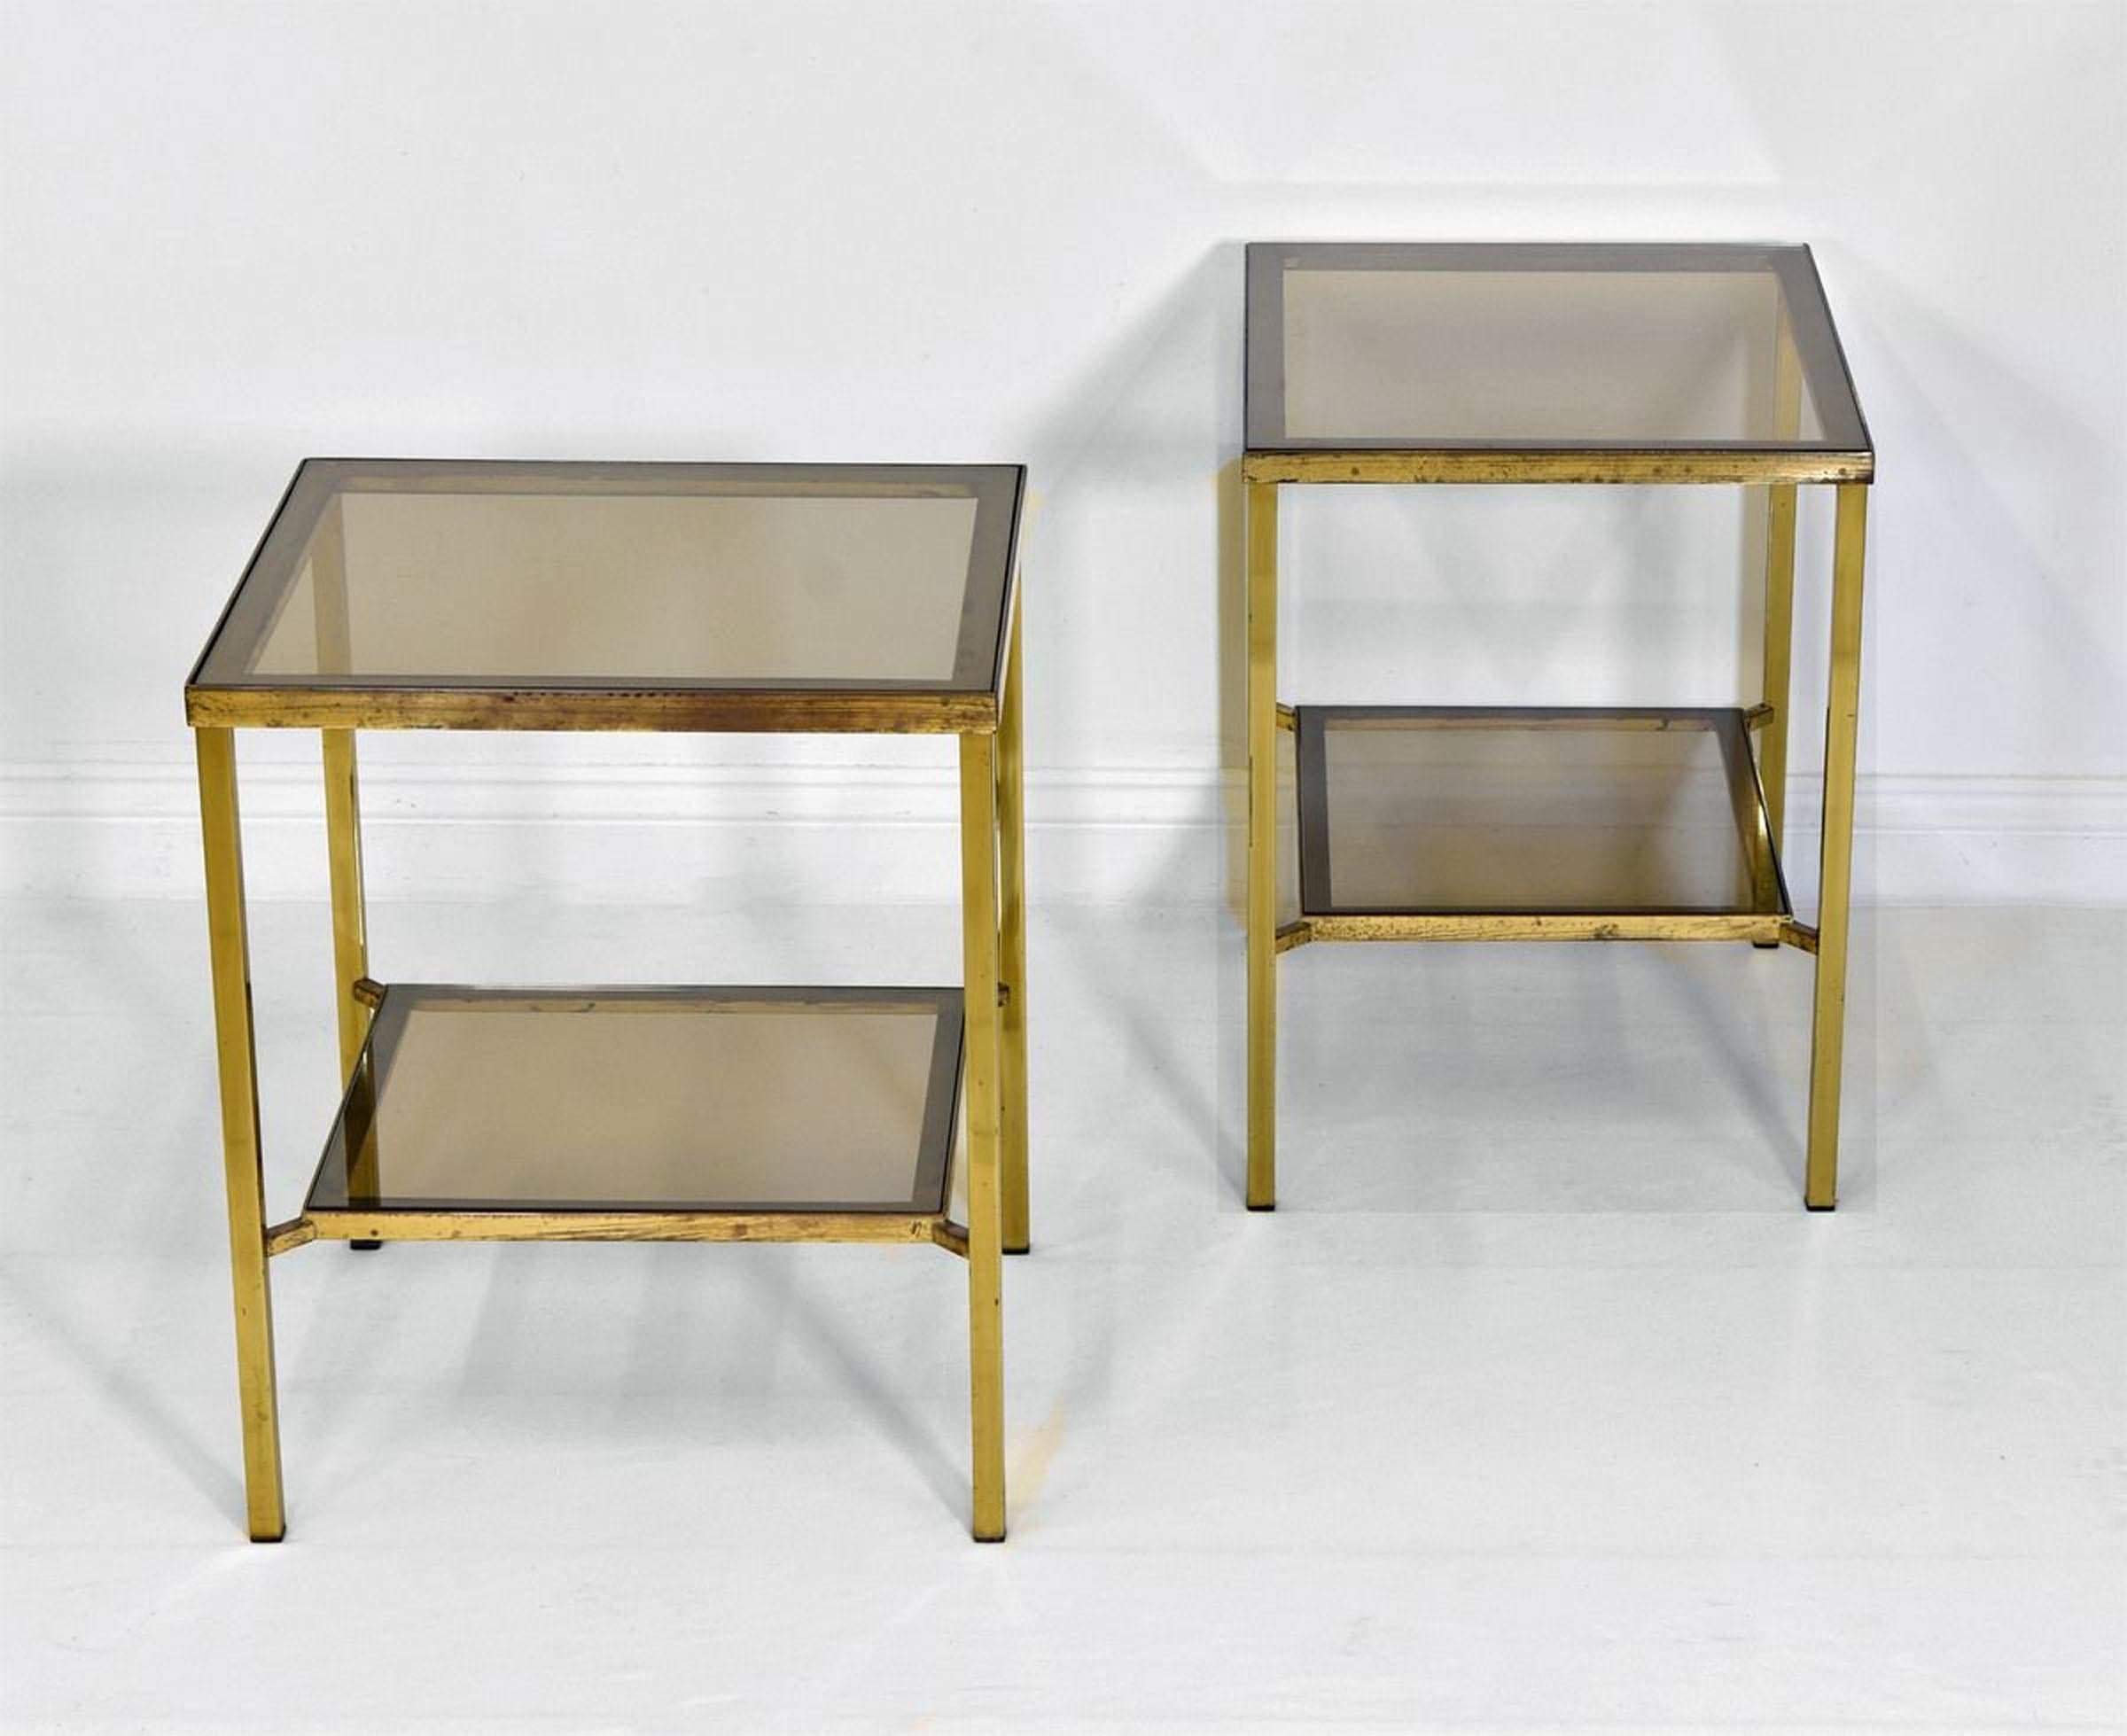 A matching pair of vintage brass side tables with two tier lightly smoked glass insets. Probably French. Circa 1970.

The tables' brass angular frames have the natural ageing and patina as befitting their age. The feet caps are all intact.

One